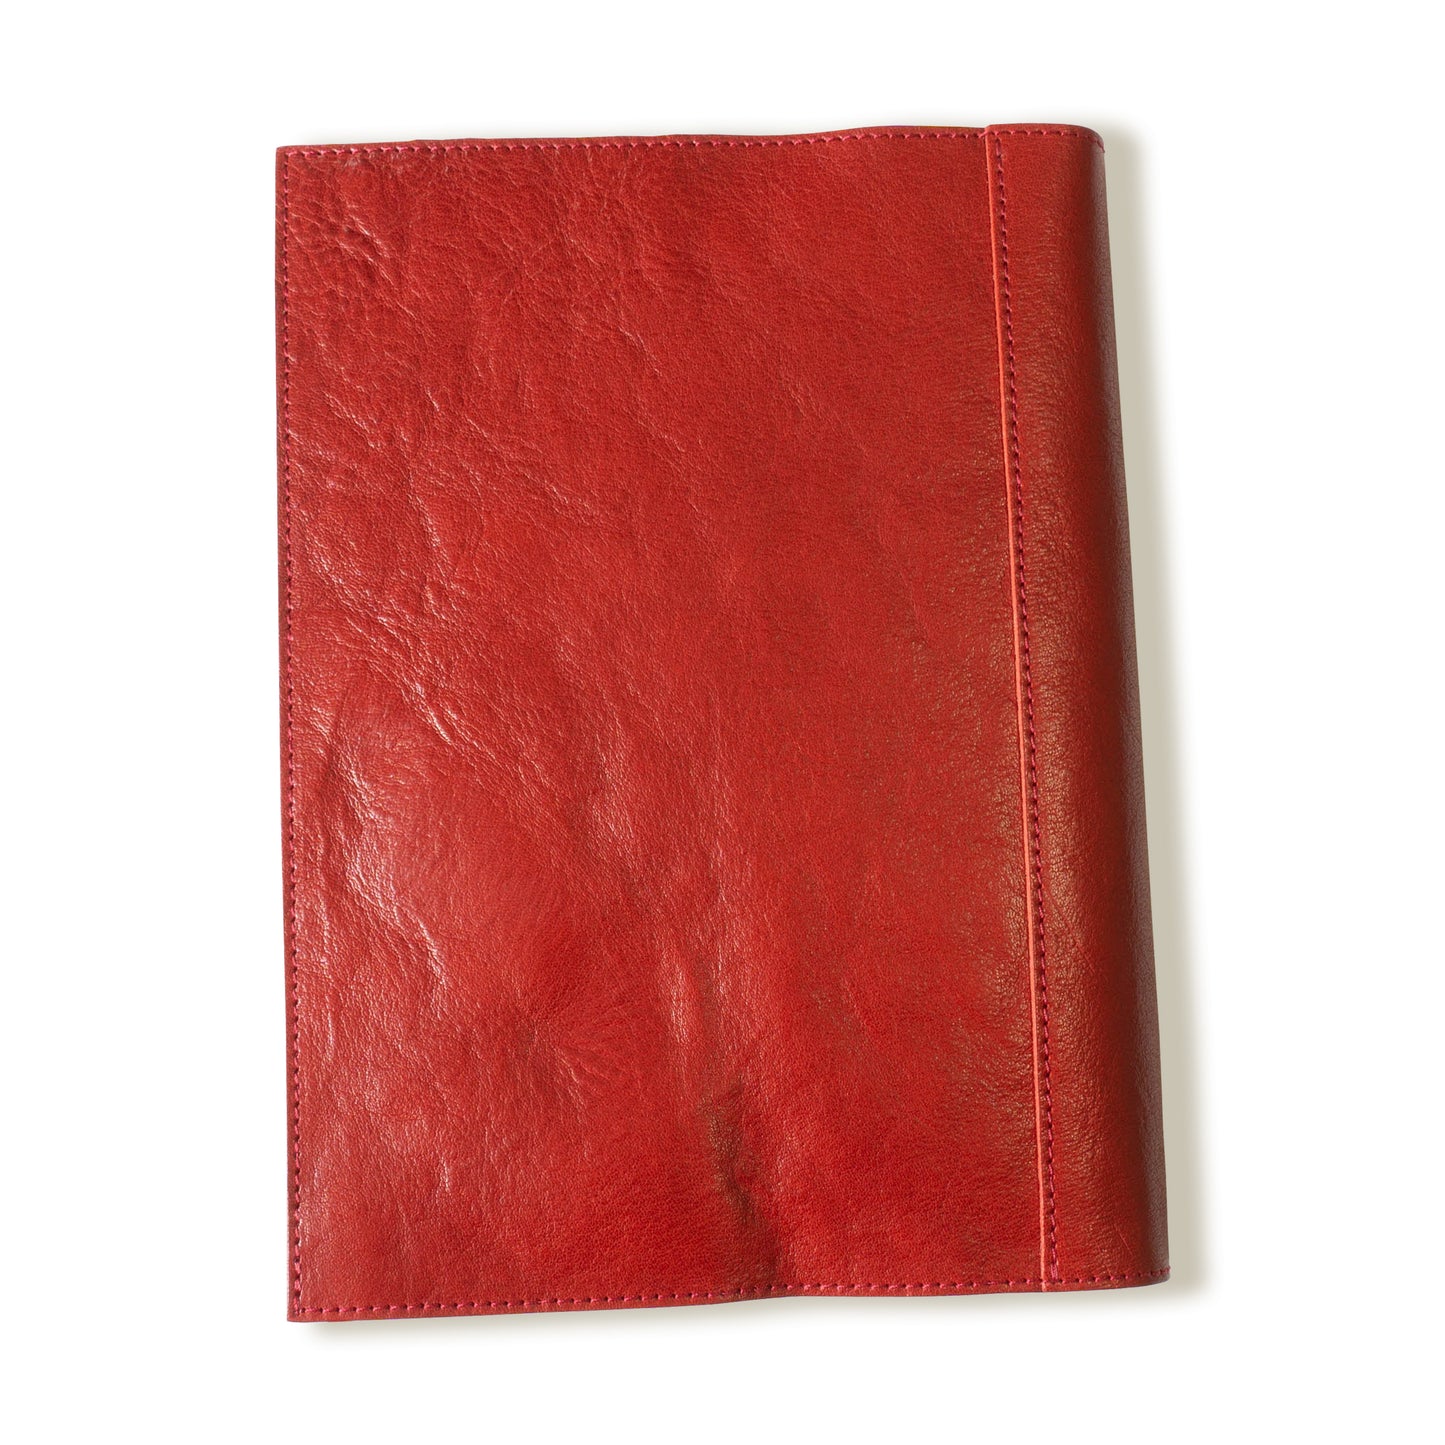 [Japanese Craftsman Made / Shrink] Book cover A5 hard cover Genuine leather bookmark included